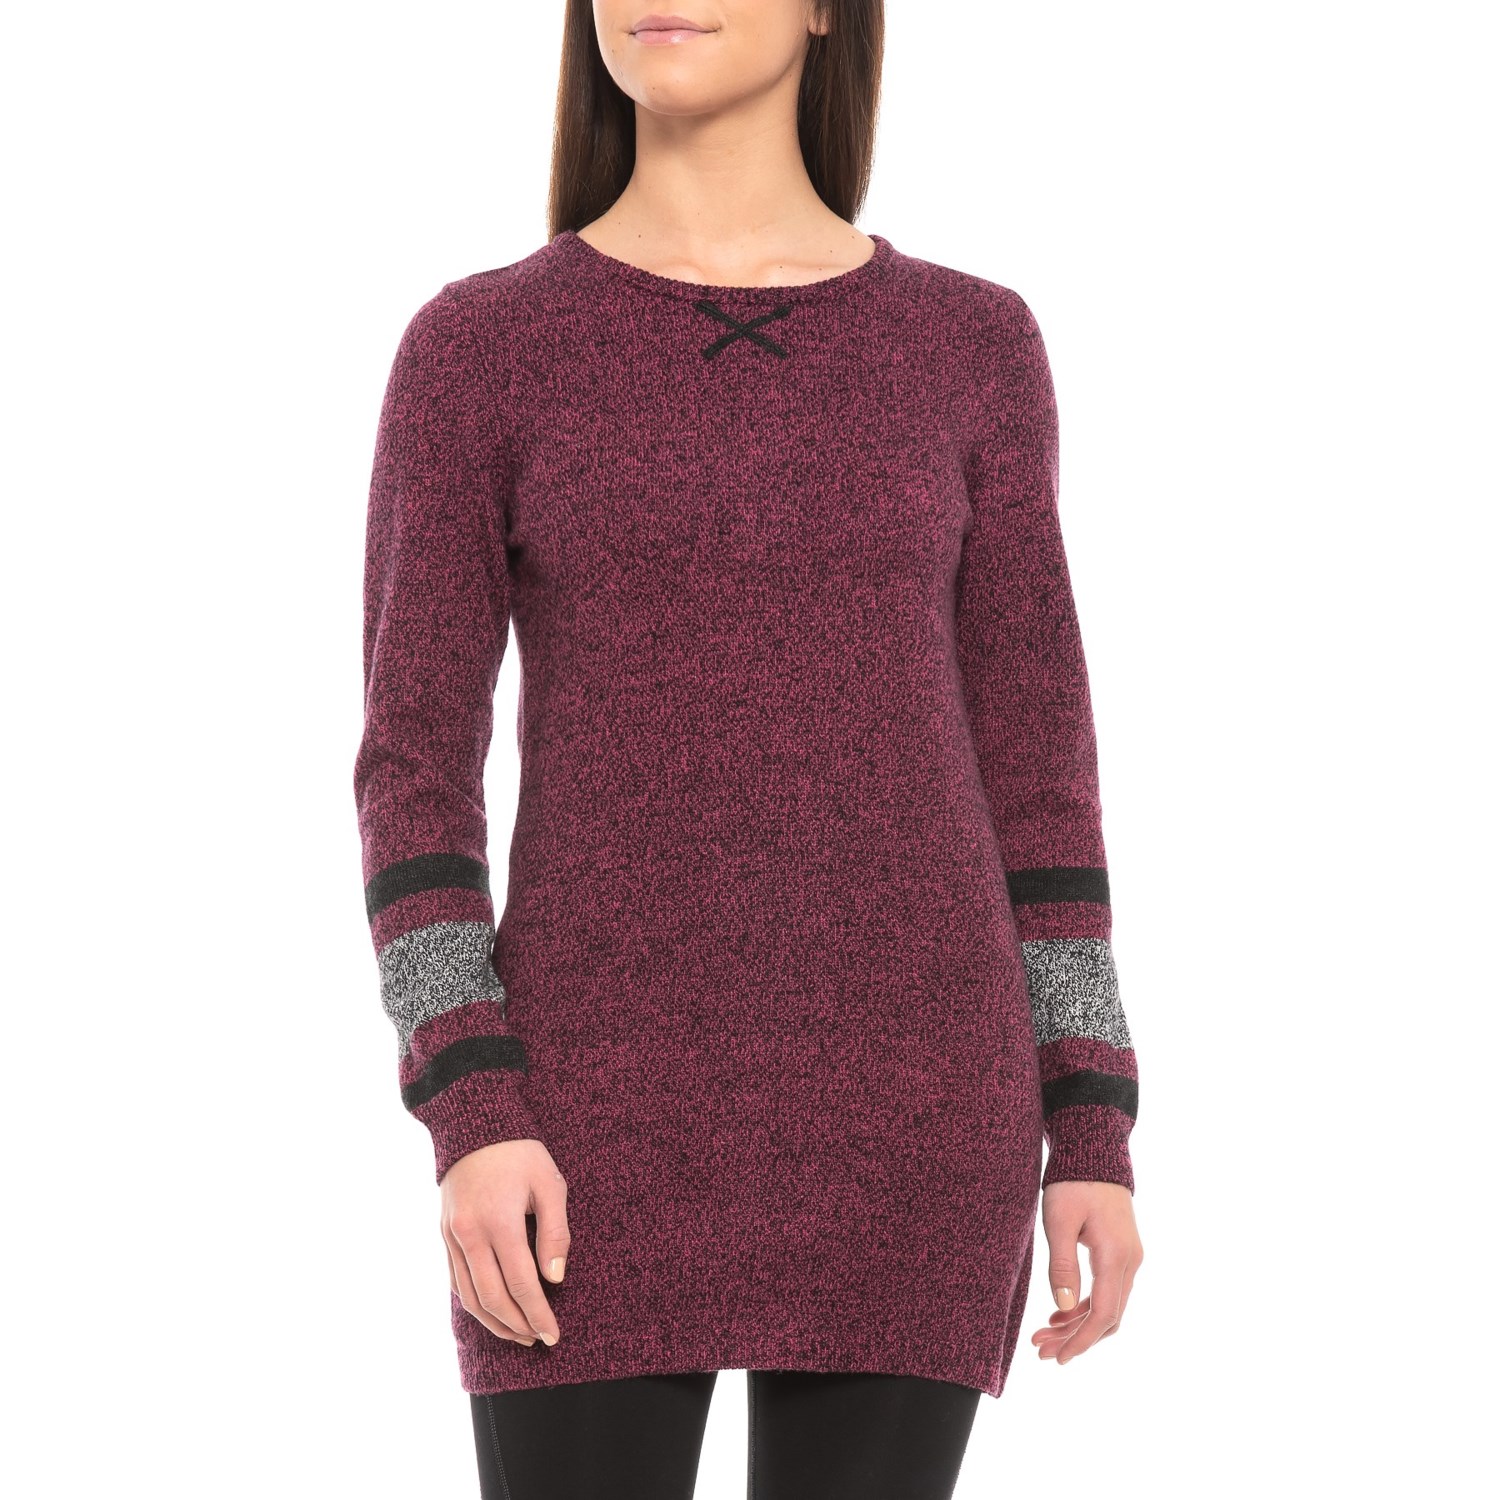 Hottotties Sweater-Knit Base Layer Top – Long Sleeve (For Women)